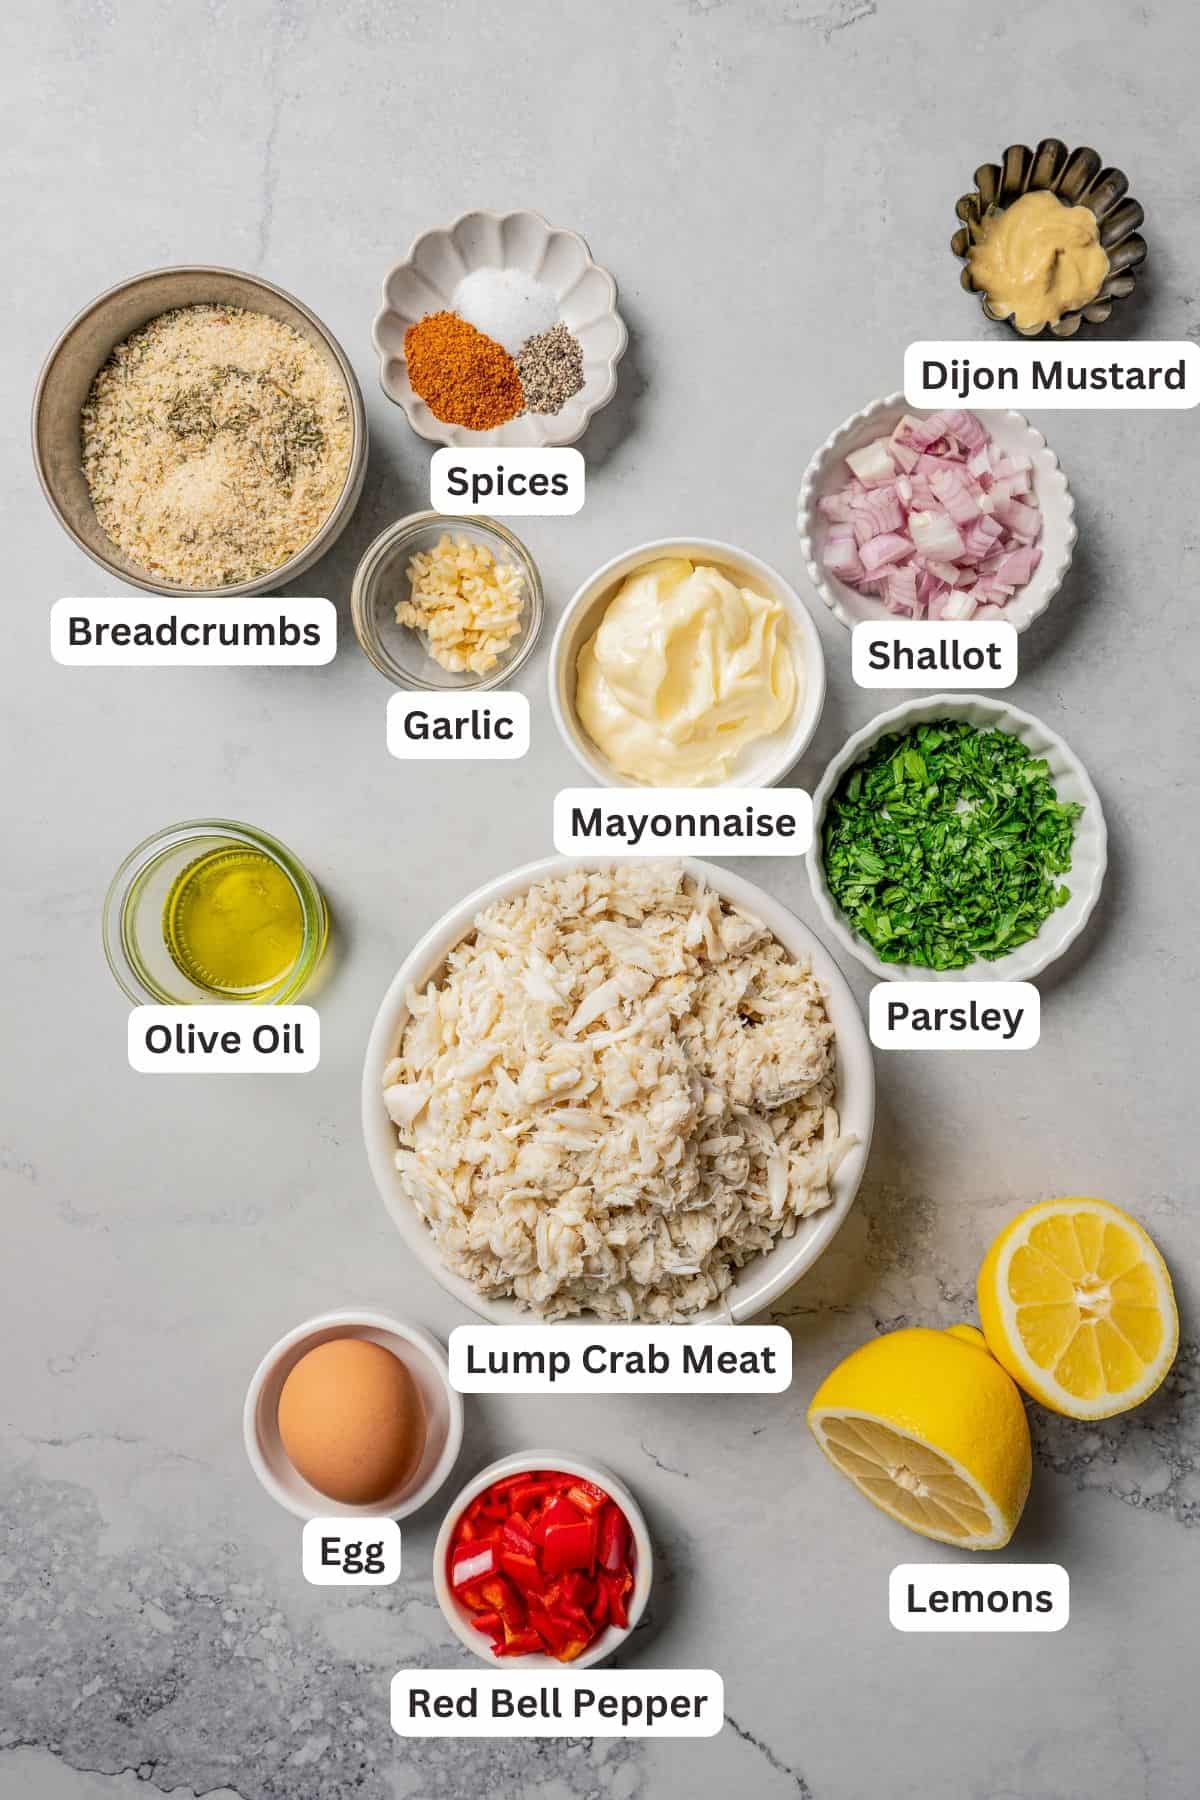 Crab cake ingredients with text labels overlaying each ingredient.